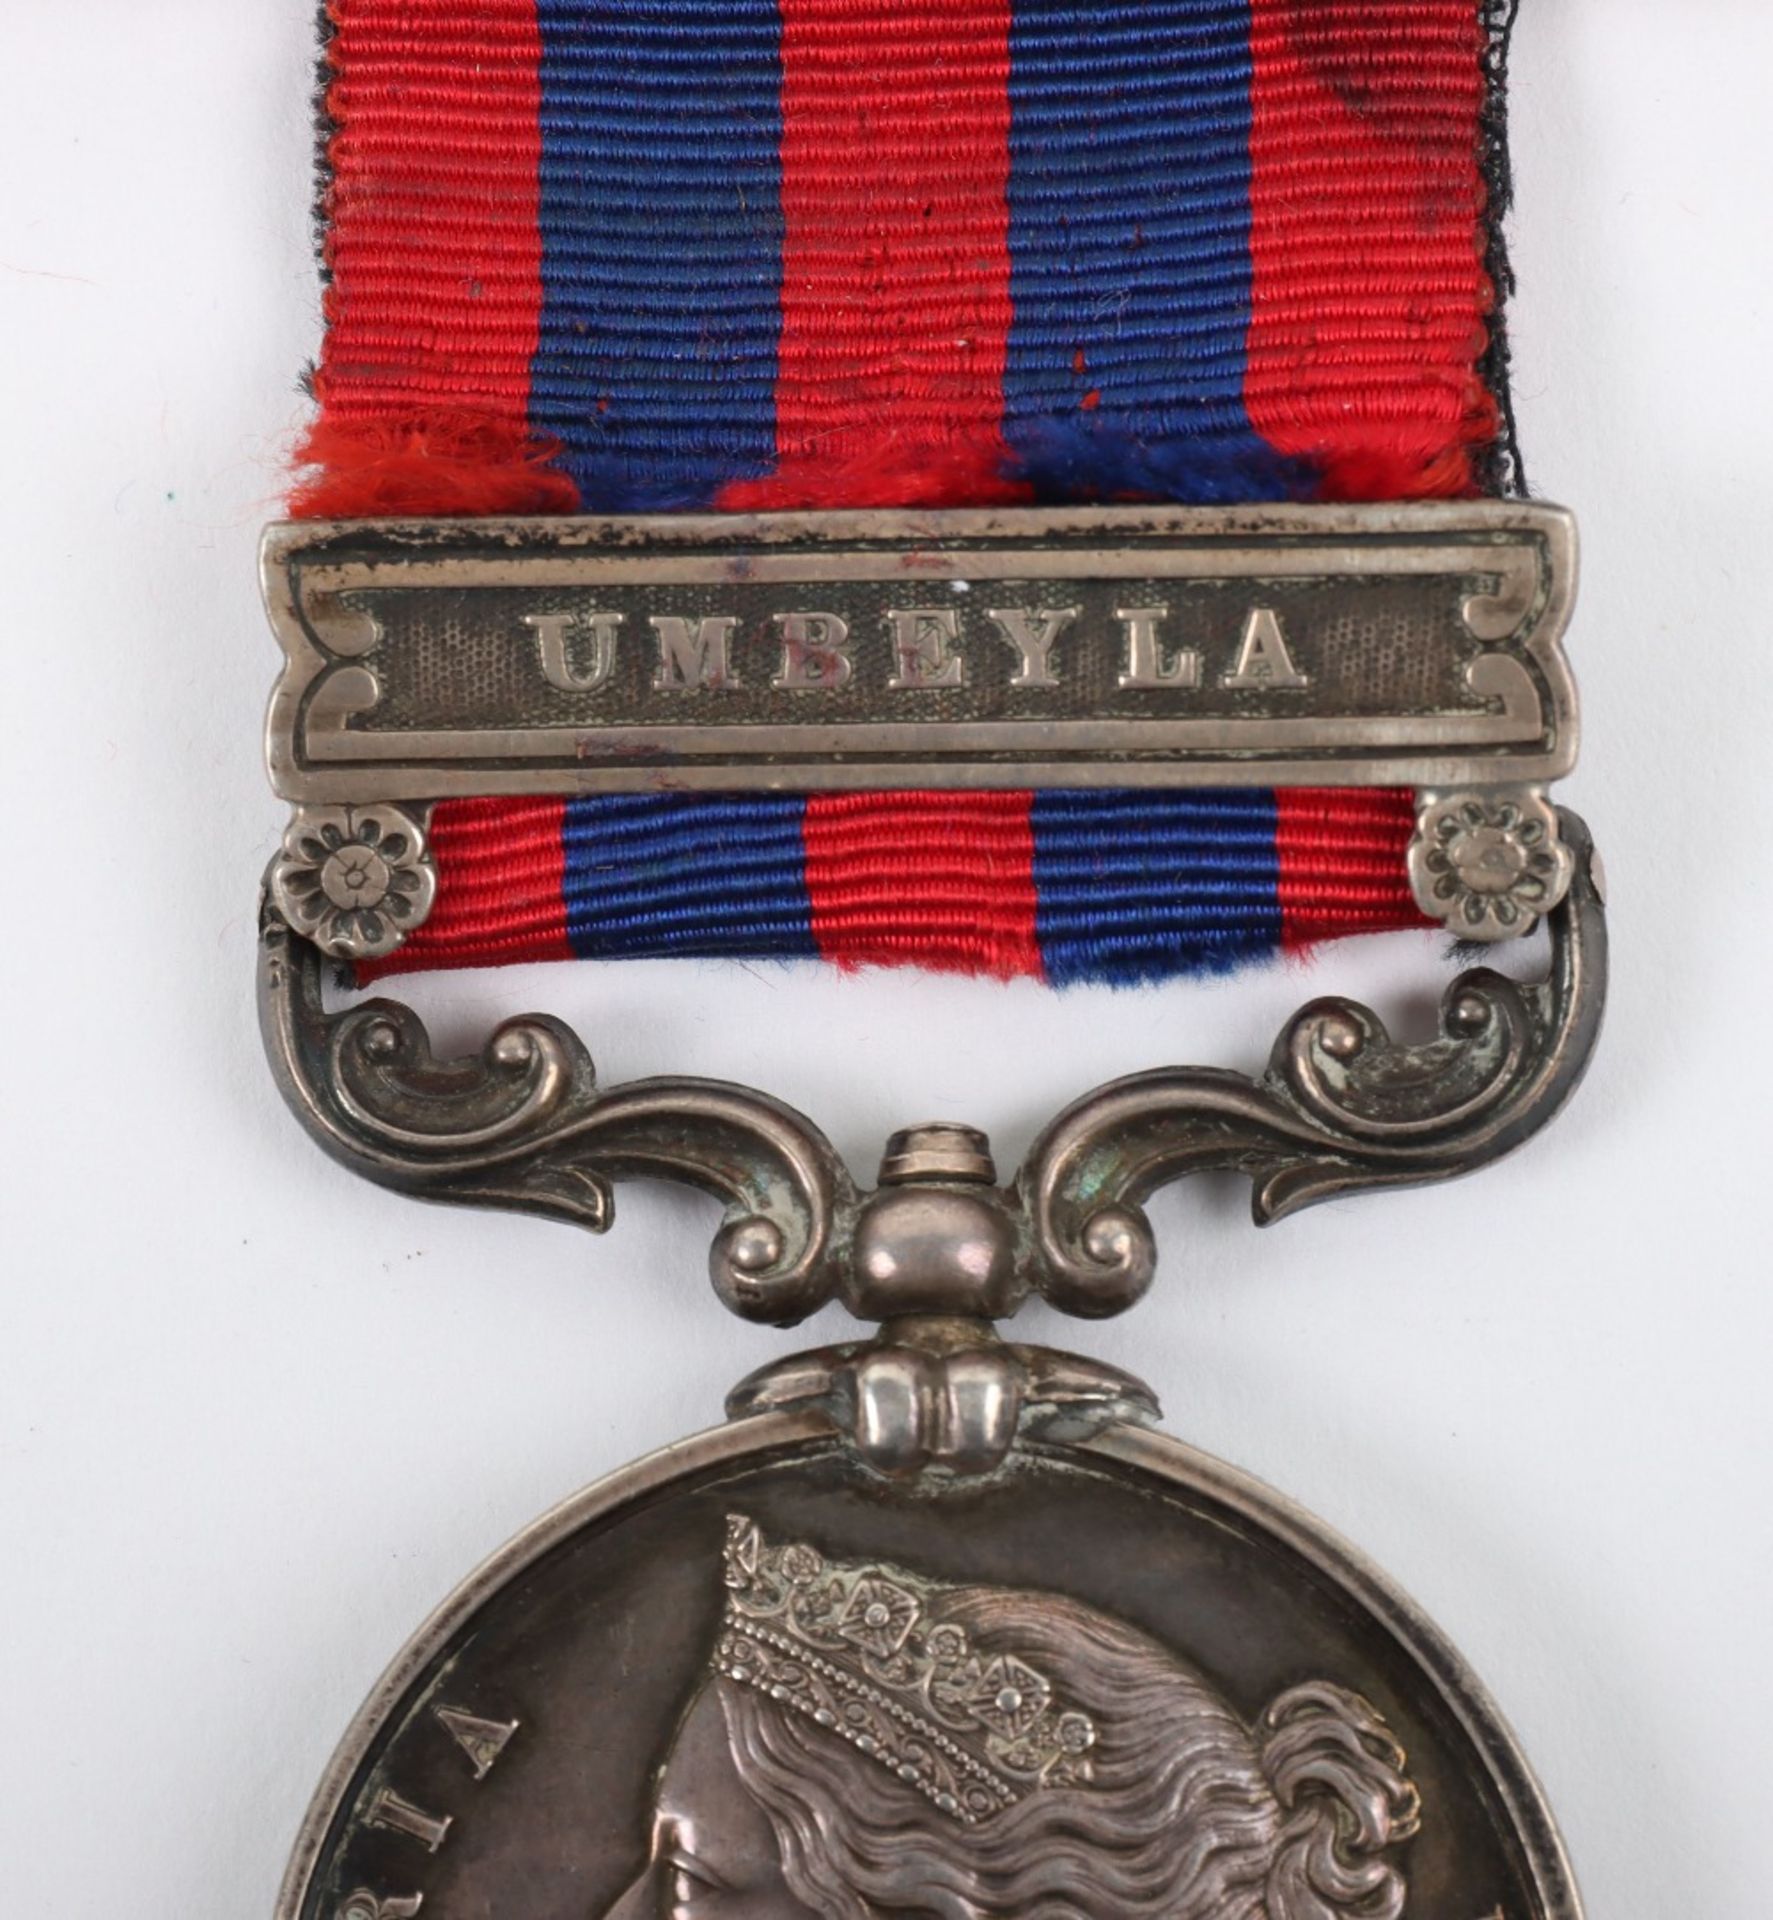 India General Service medal 1854-95 For Service in the 1863 Umbeyla Campaign - Image 4 of 4